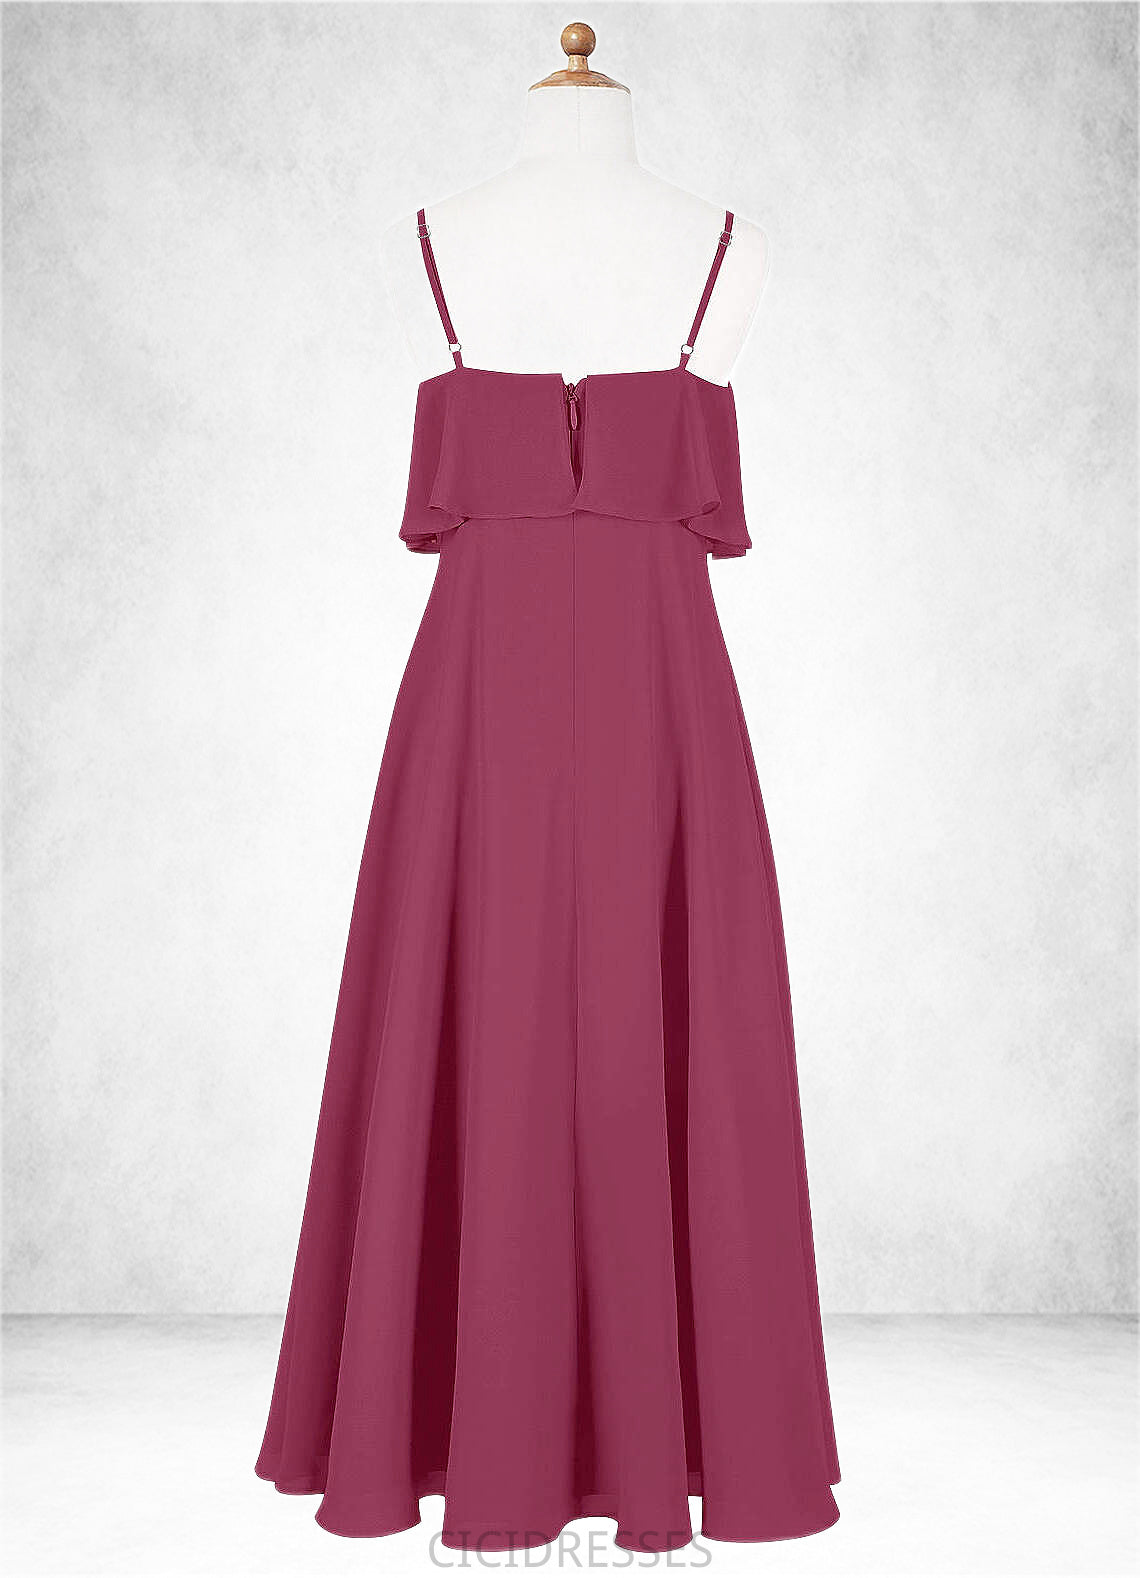 Tiana A-Line Ruched Chiffon Floor-Length Junior Bridesmaid Dress Mulberry CIC8P0022874